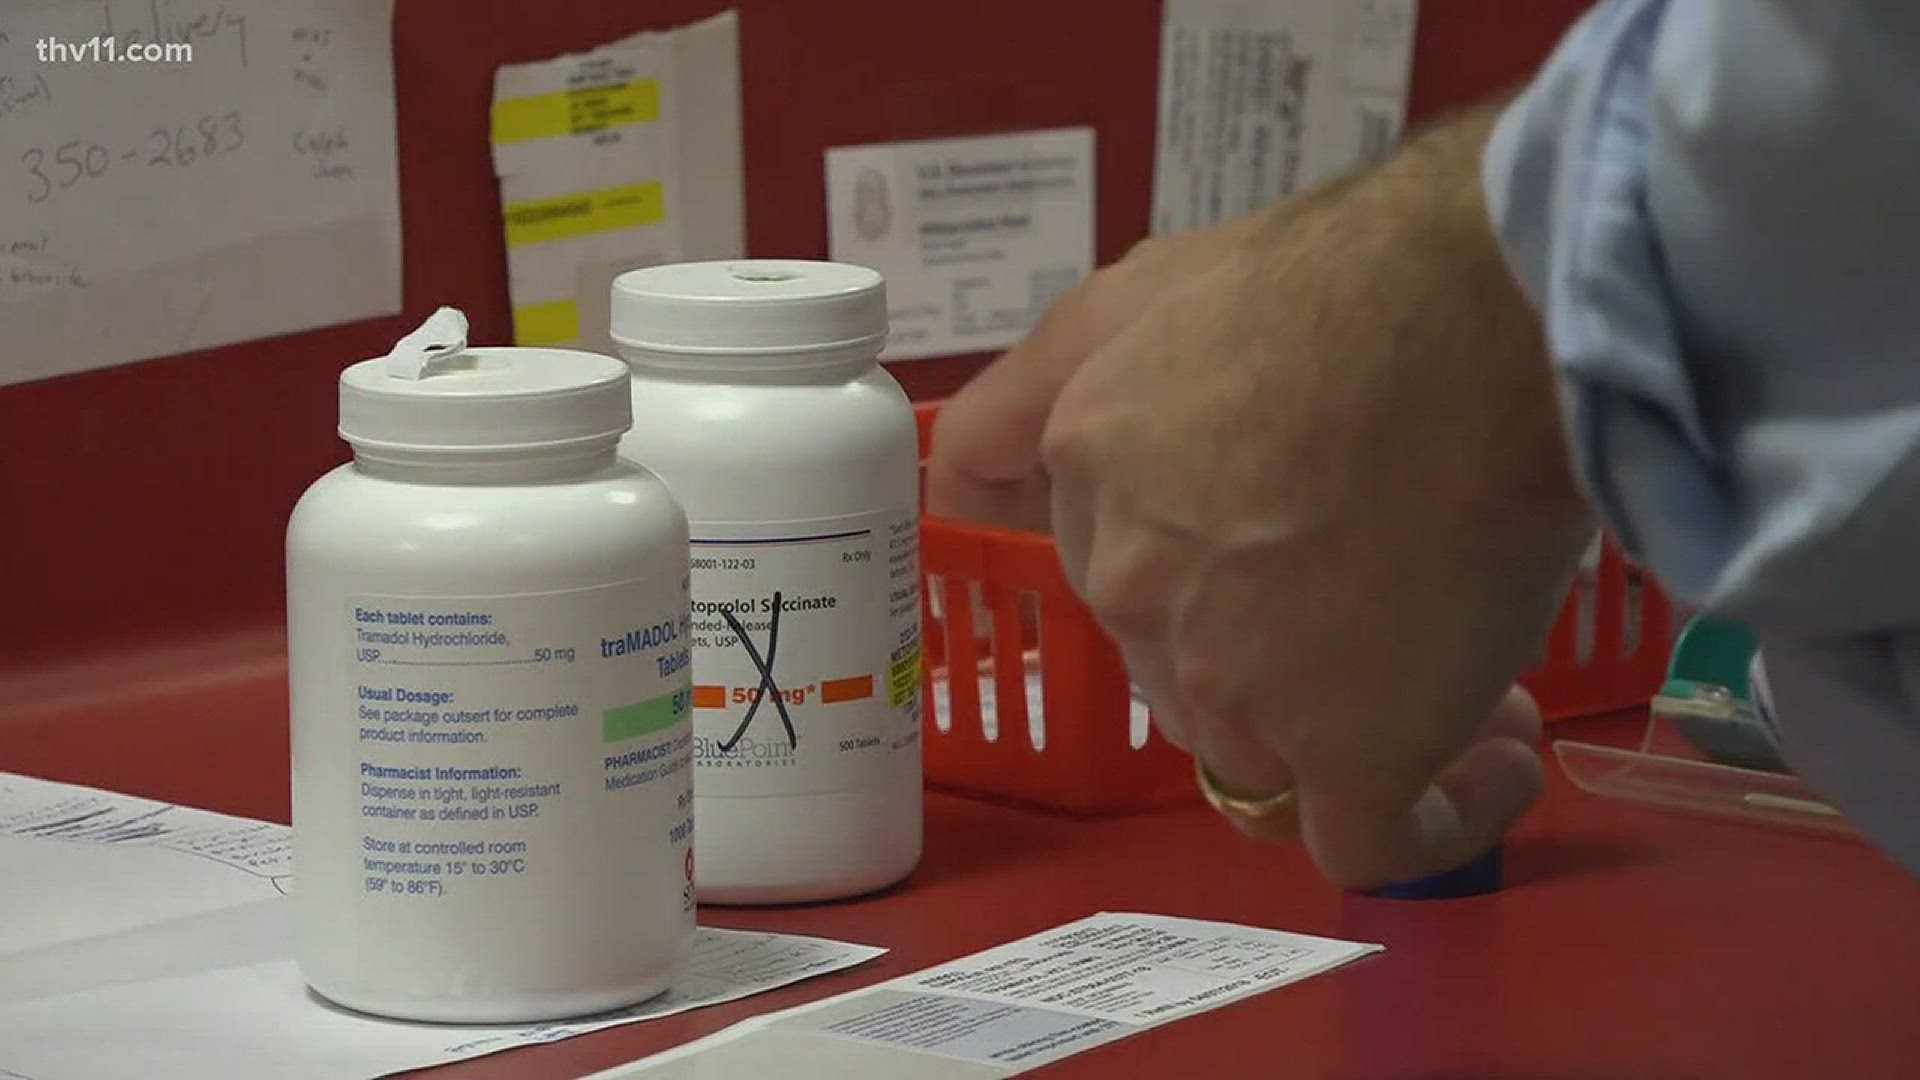 A now-mandatory database keeps track of all the medications patients are prescribed from all Arkansas doctors.